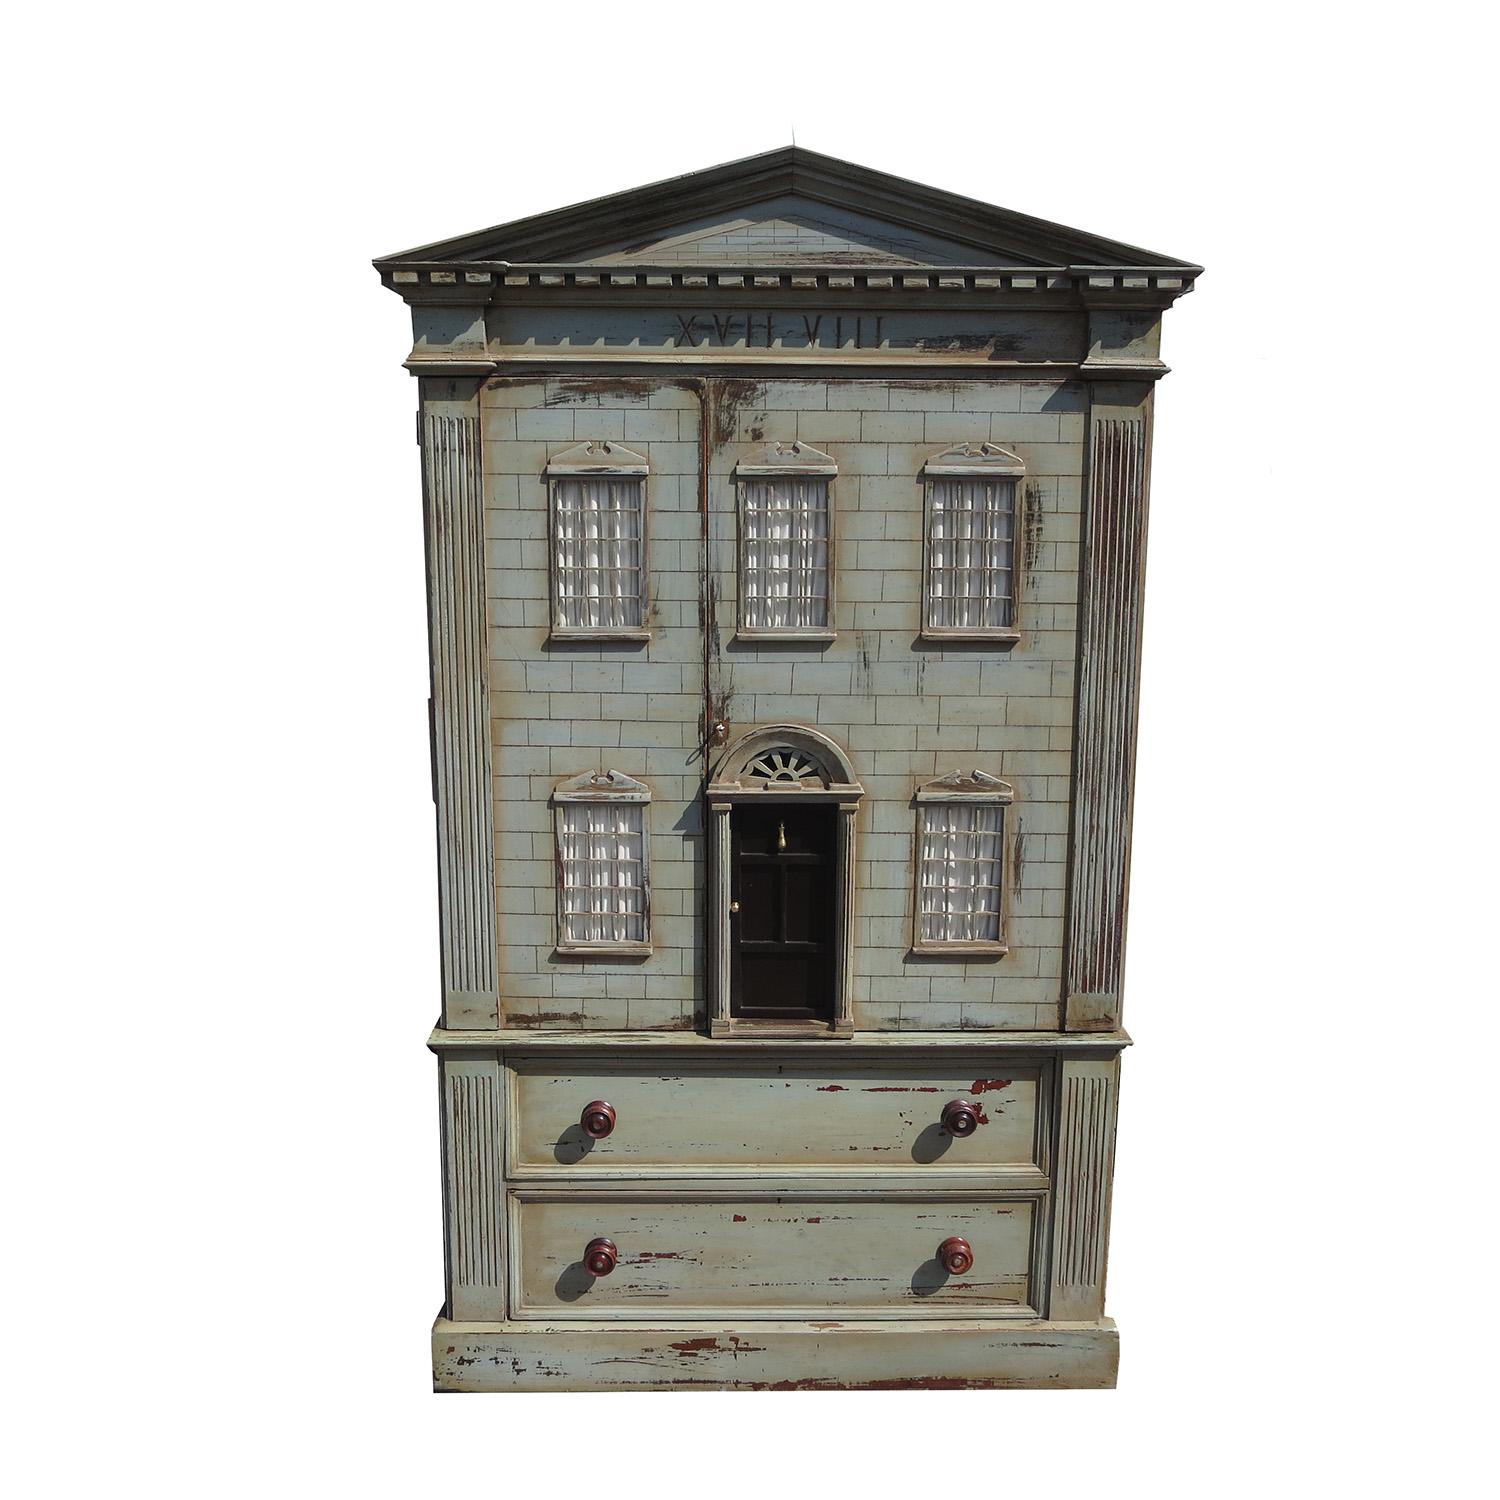 This charming cabinet was designed to resemble a large building. The exterior surfaces are hand painted and show intended wear. The top section lifts off the drawers and base for easy moving. The top opens to reveal removable shelves, while the